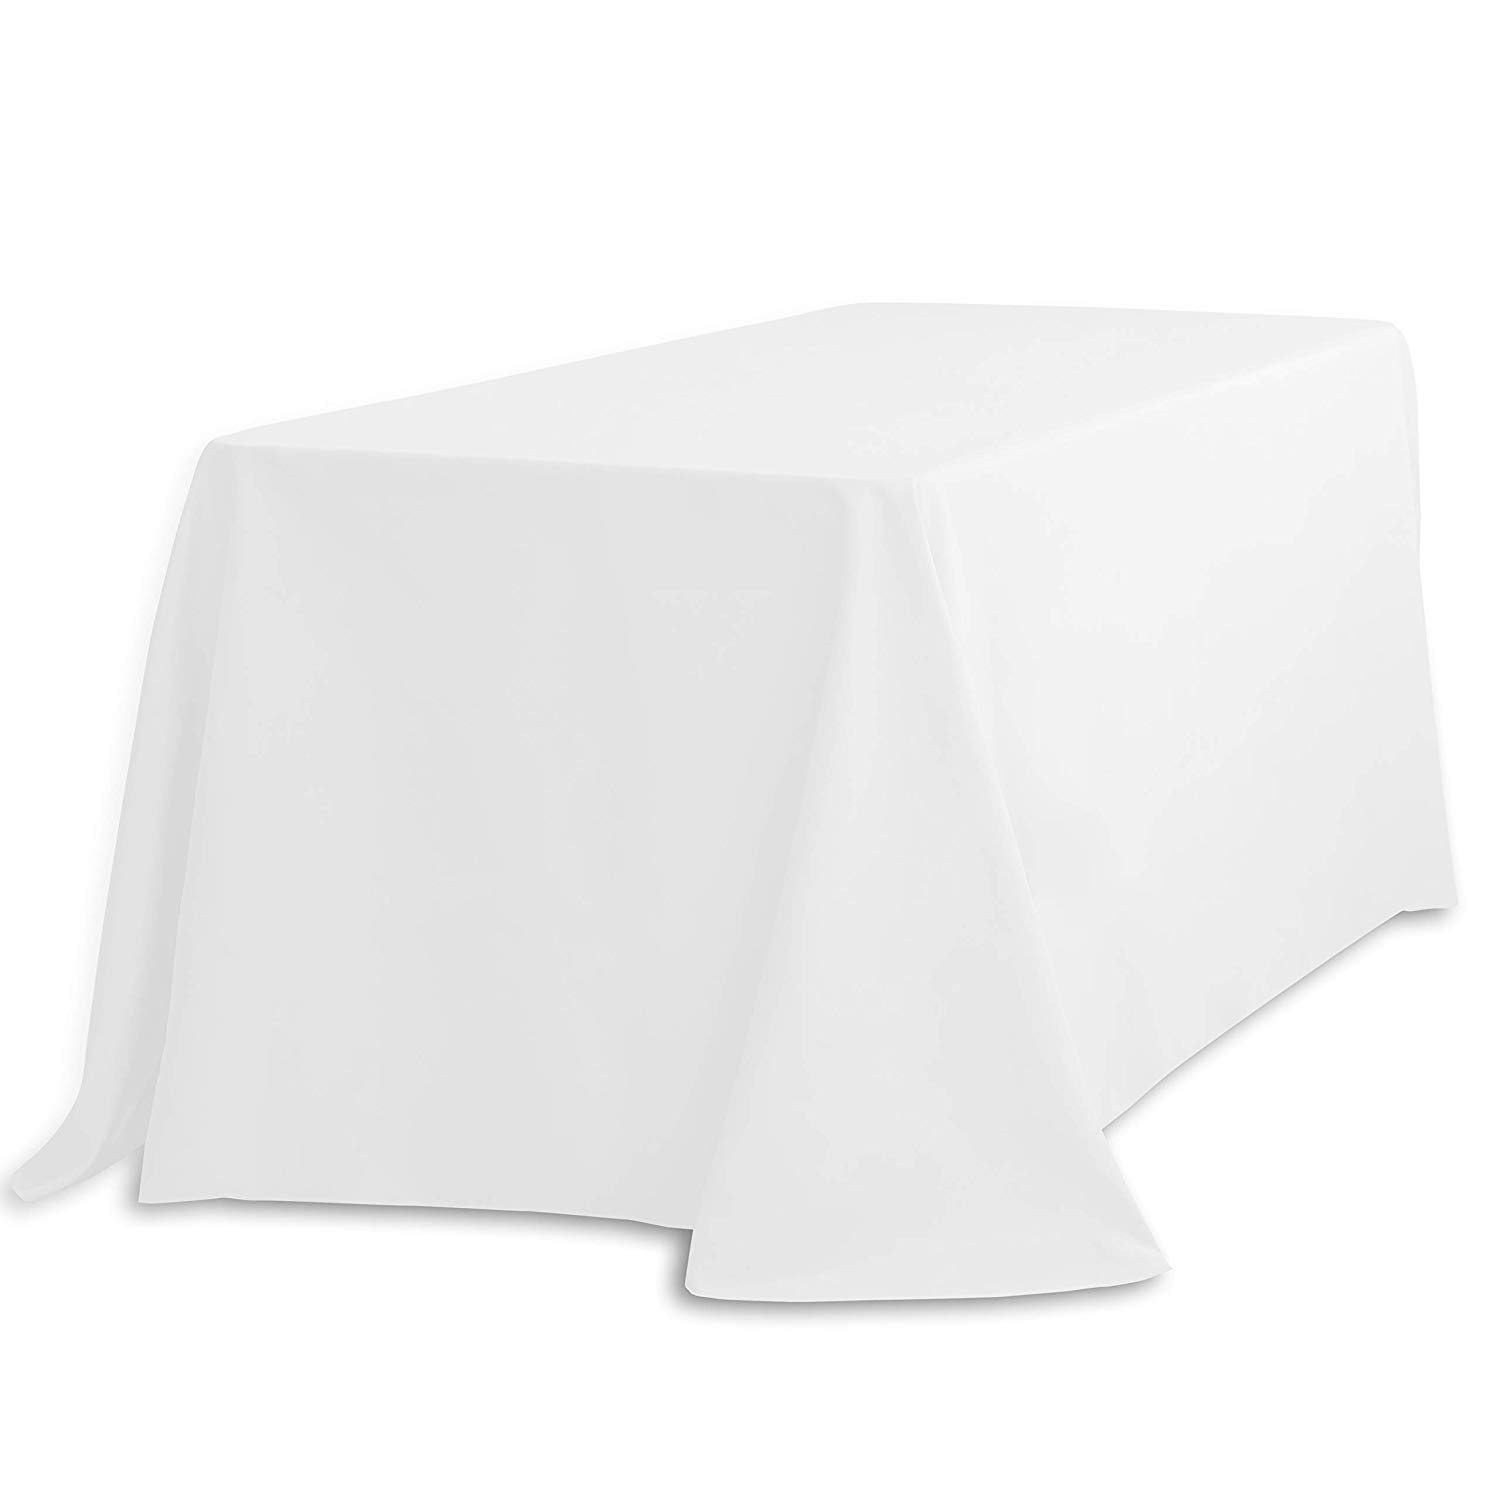 White tablecloth for wedding receptions